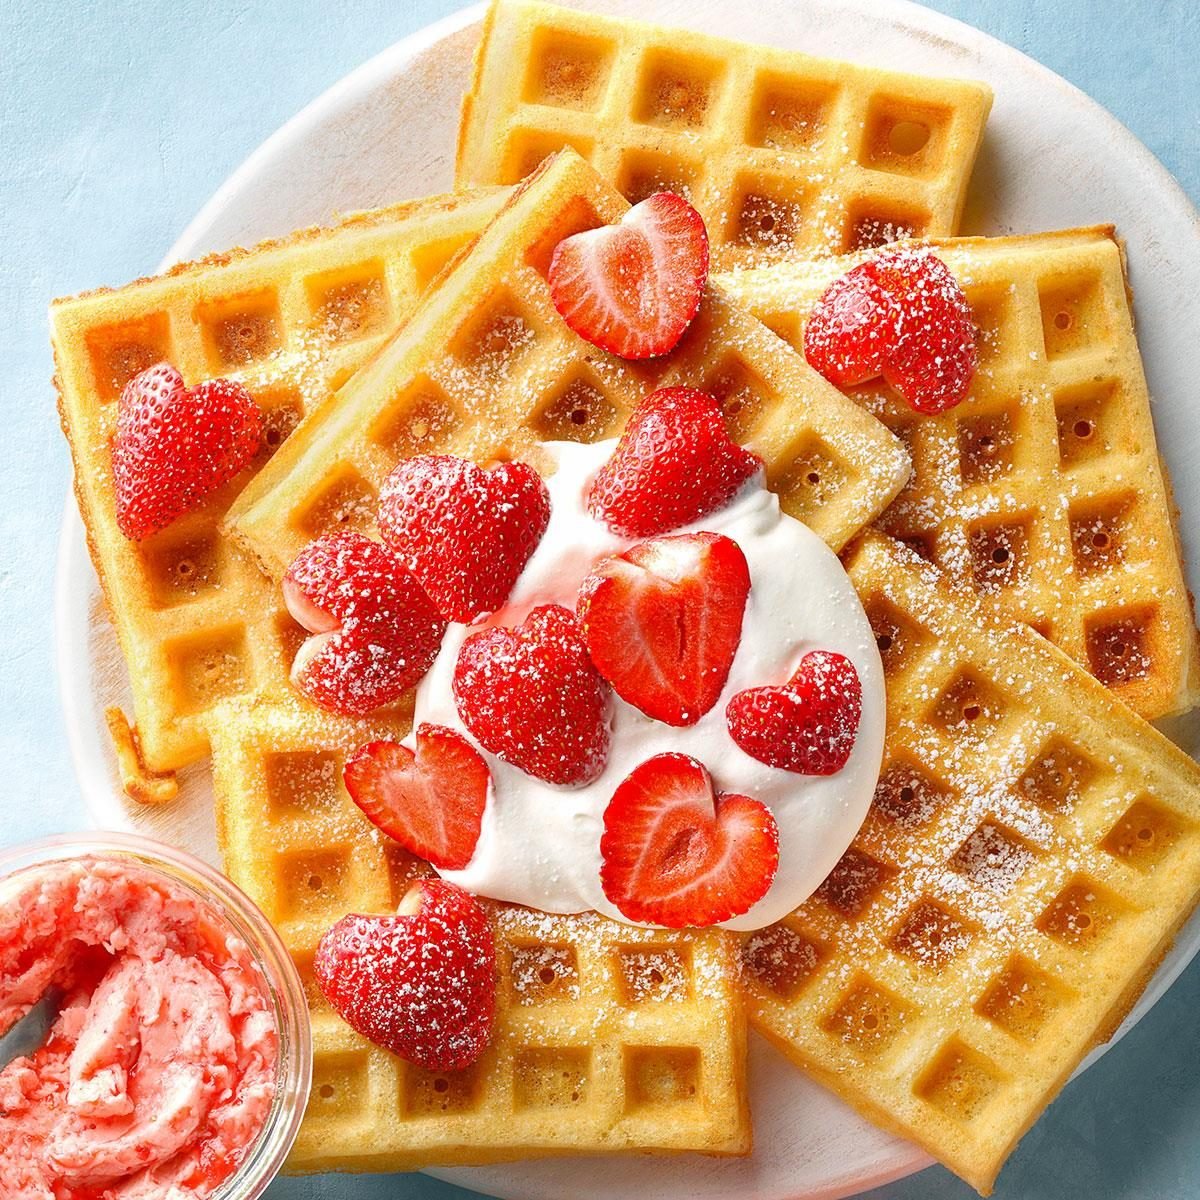 Overnight Yeast Waffles Exps Tohfm23 23360 Dr 09 09 2bc